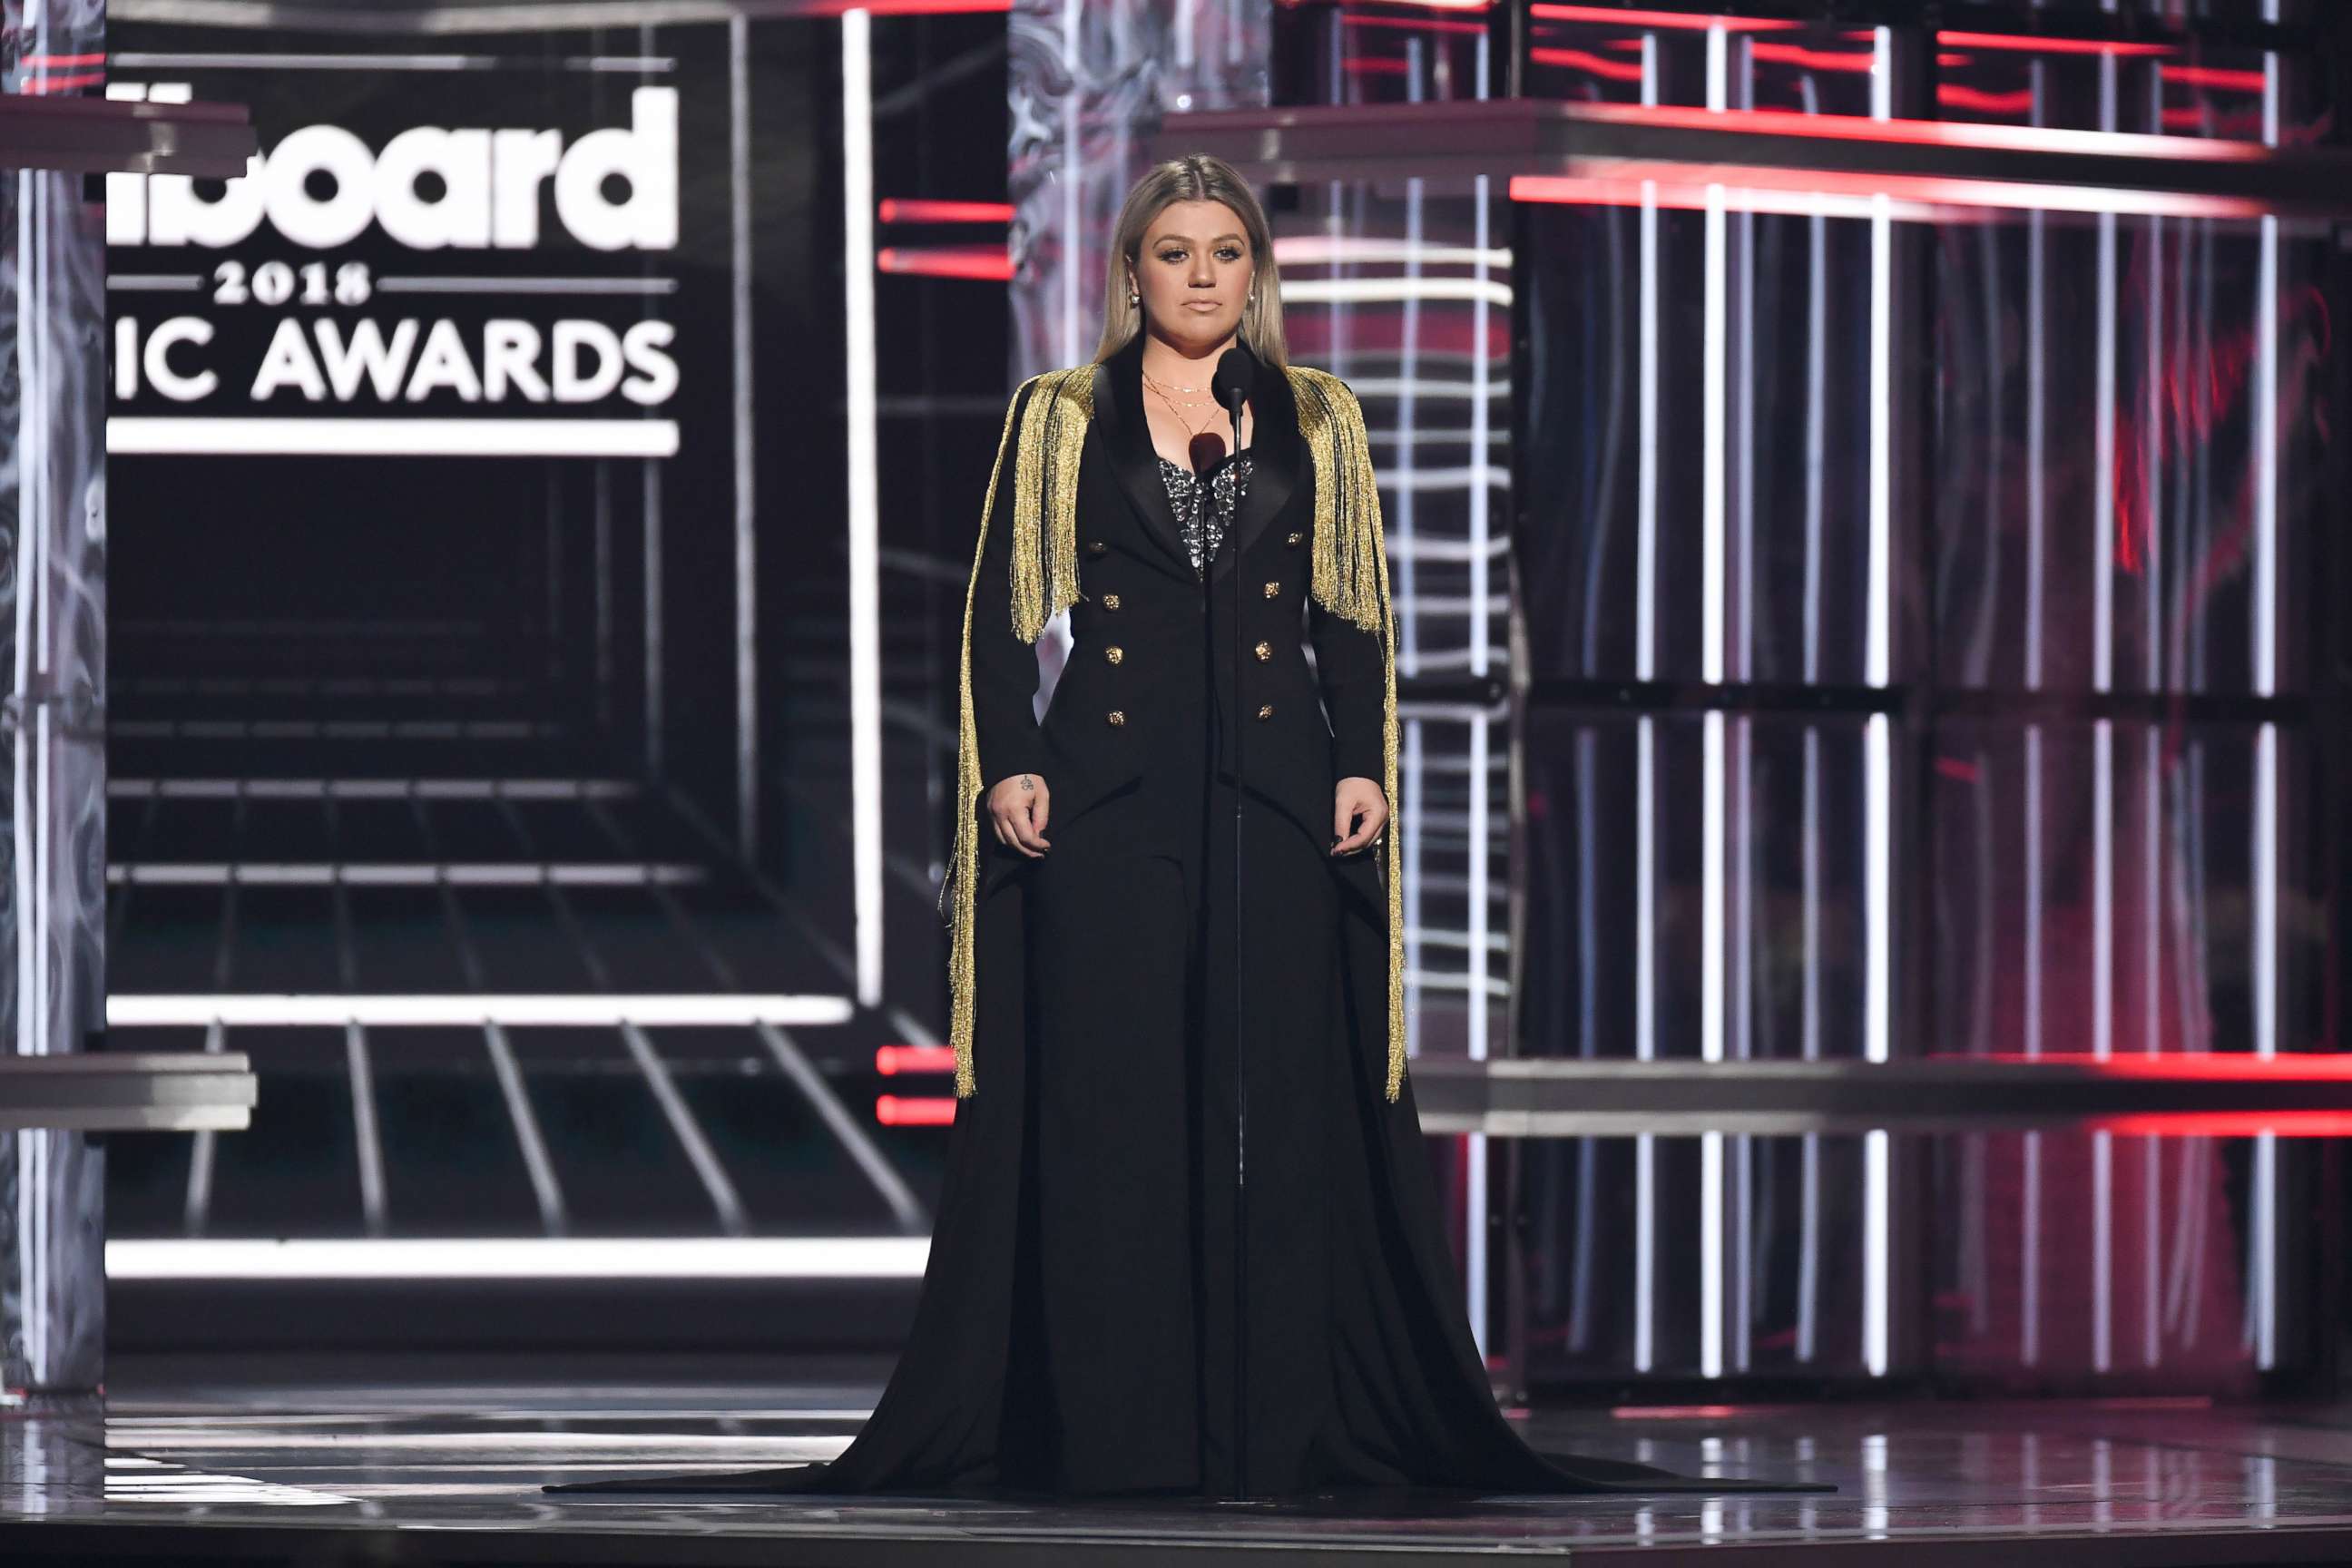 PHOTO: Kelly Clarkson at the Billboard Music Awards, in Las Vegas, May 20, 2018.